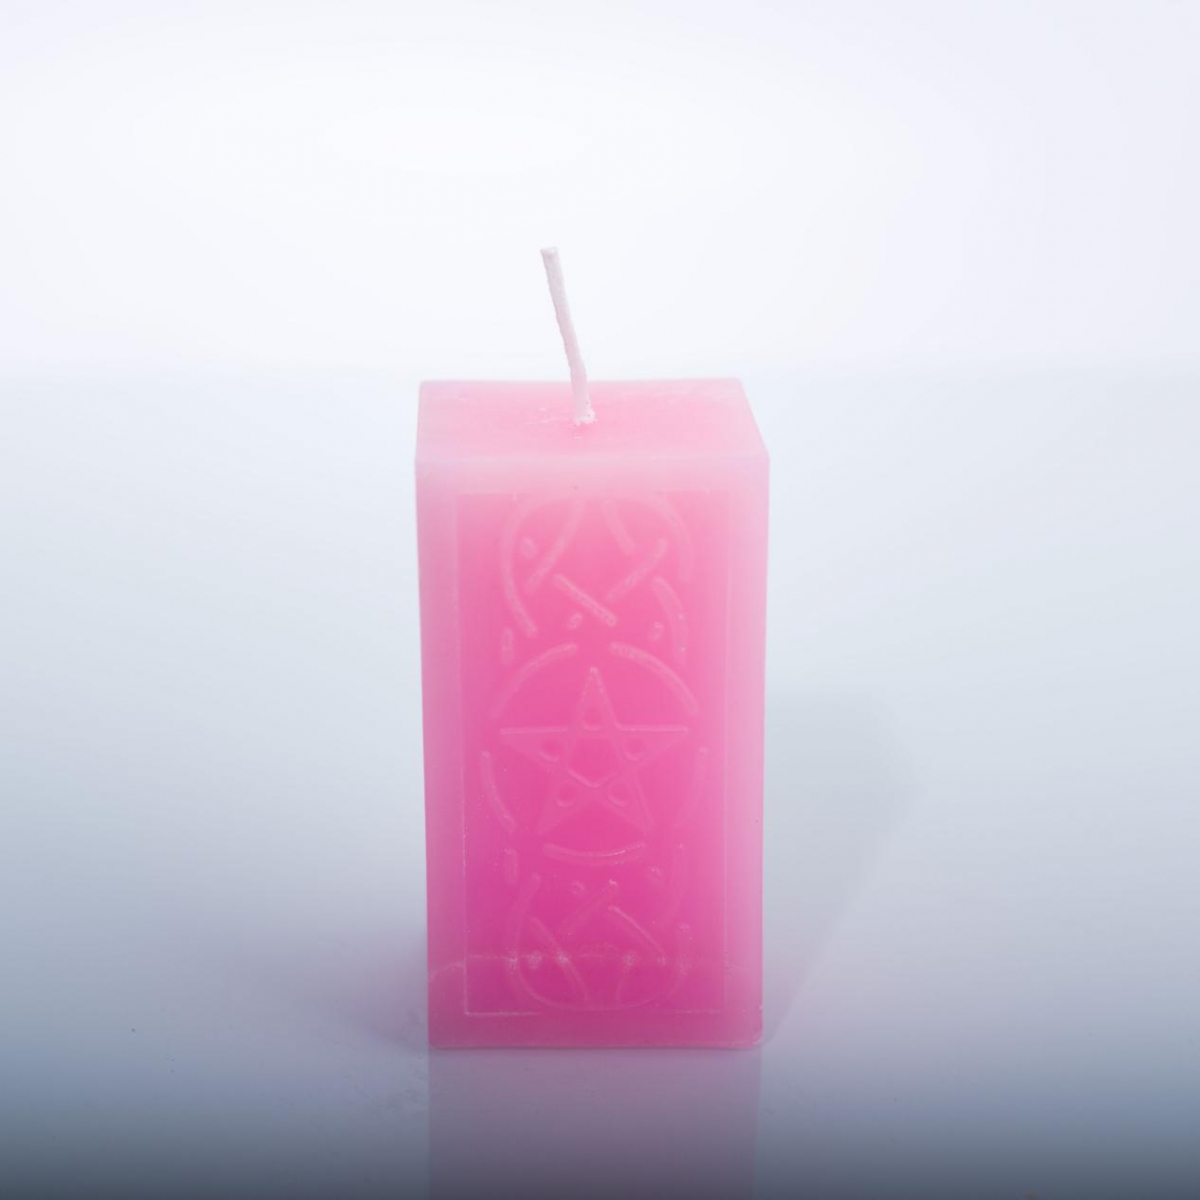 Religious Candles ：Carved Witchcraft LOGO ，Pink Cube Candle ，China Factory ，Wholesale Price-HOWCANDLE-Candles,Scented Candles,Aromatherapy Candles,Soy Candles,Vegan Candles,Jar Candles,Pillar Candles,Candle Gift Sets,Essential Oils,Reed Diffuser,Candle Holder,